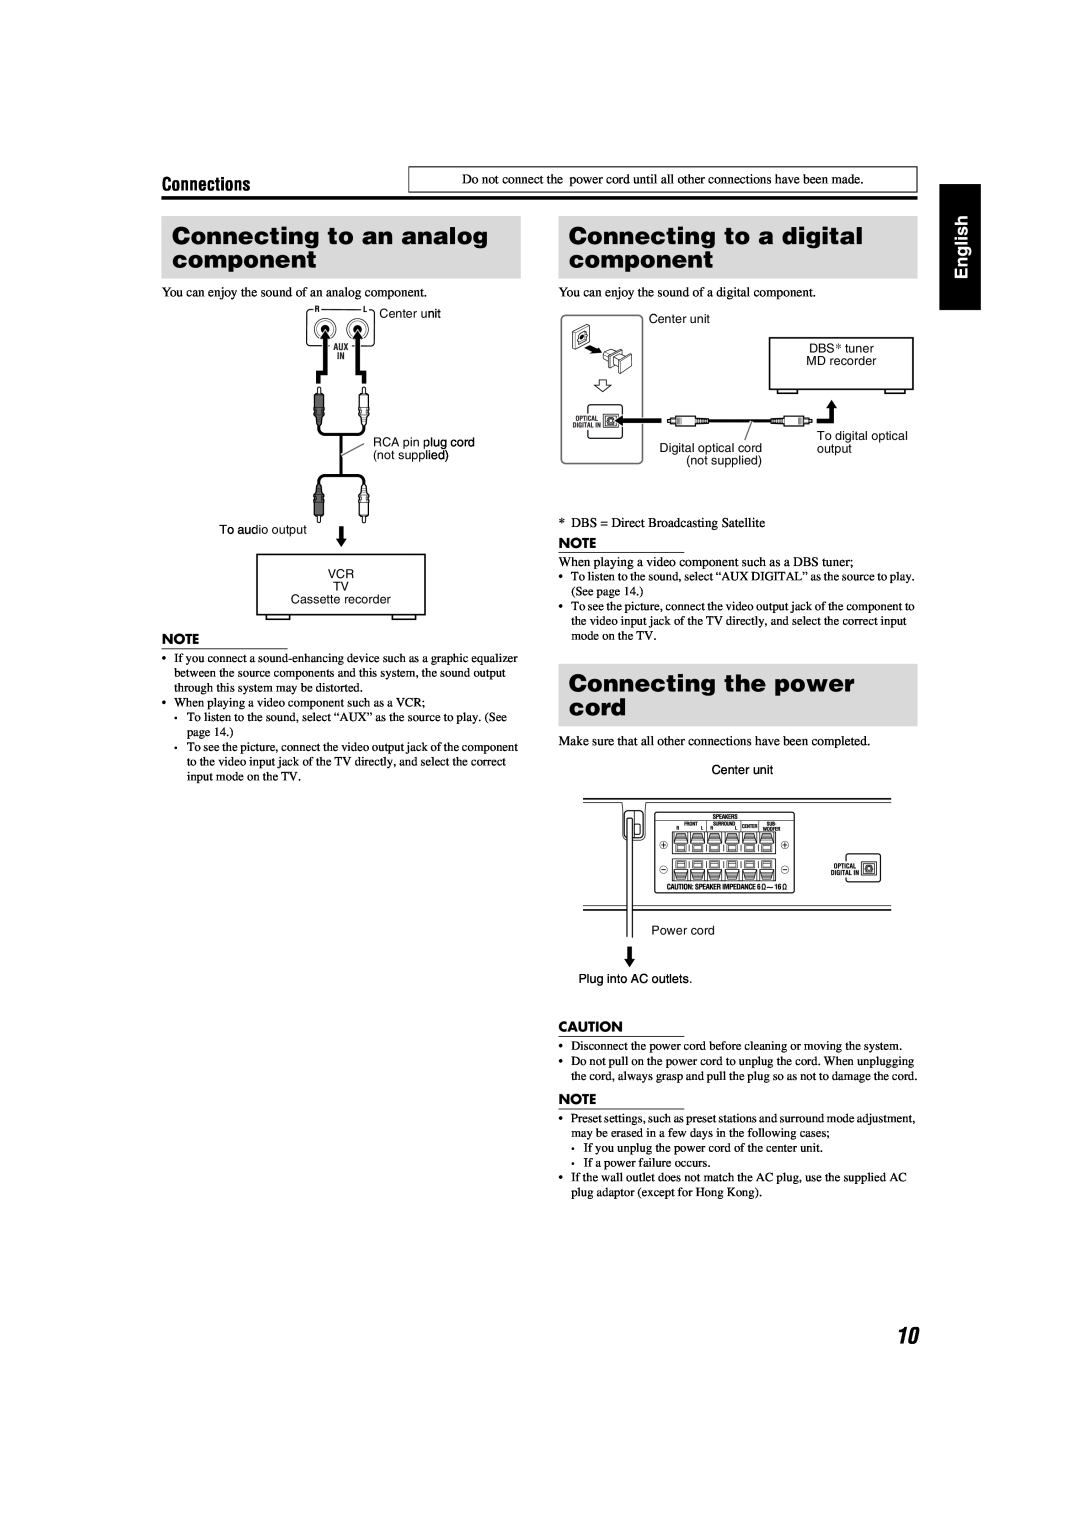 JVC GVT0141-003A manual Connecting to an analog component, Connecting to a digital component, Connecting the power cord 